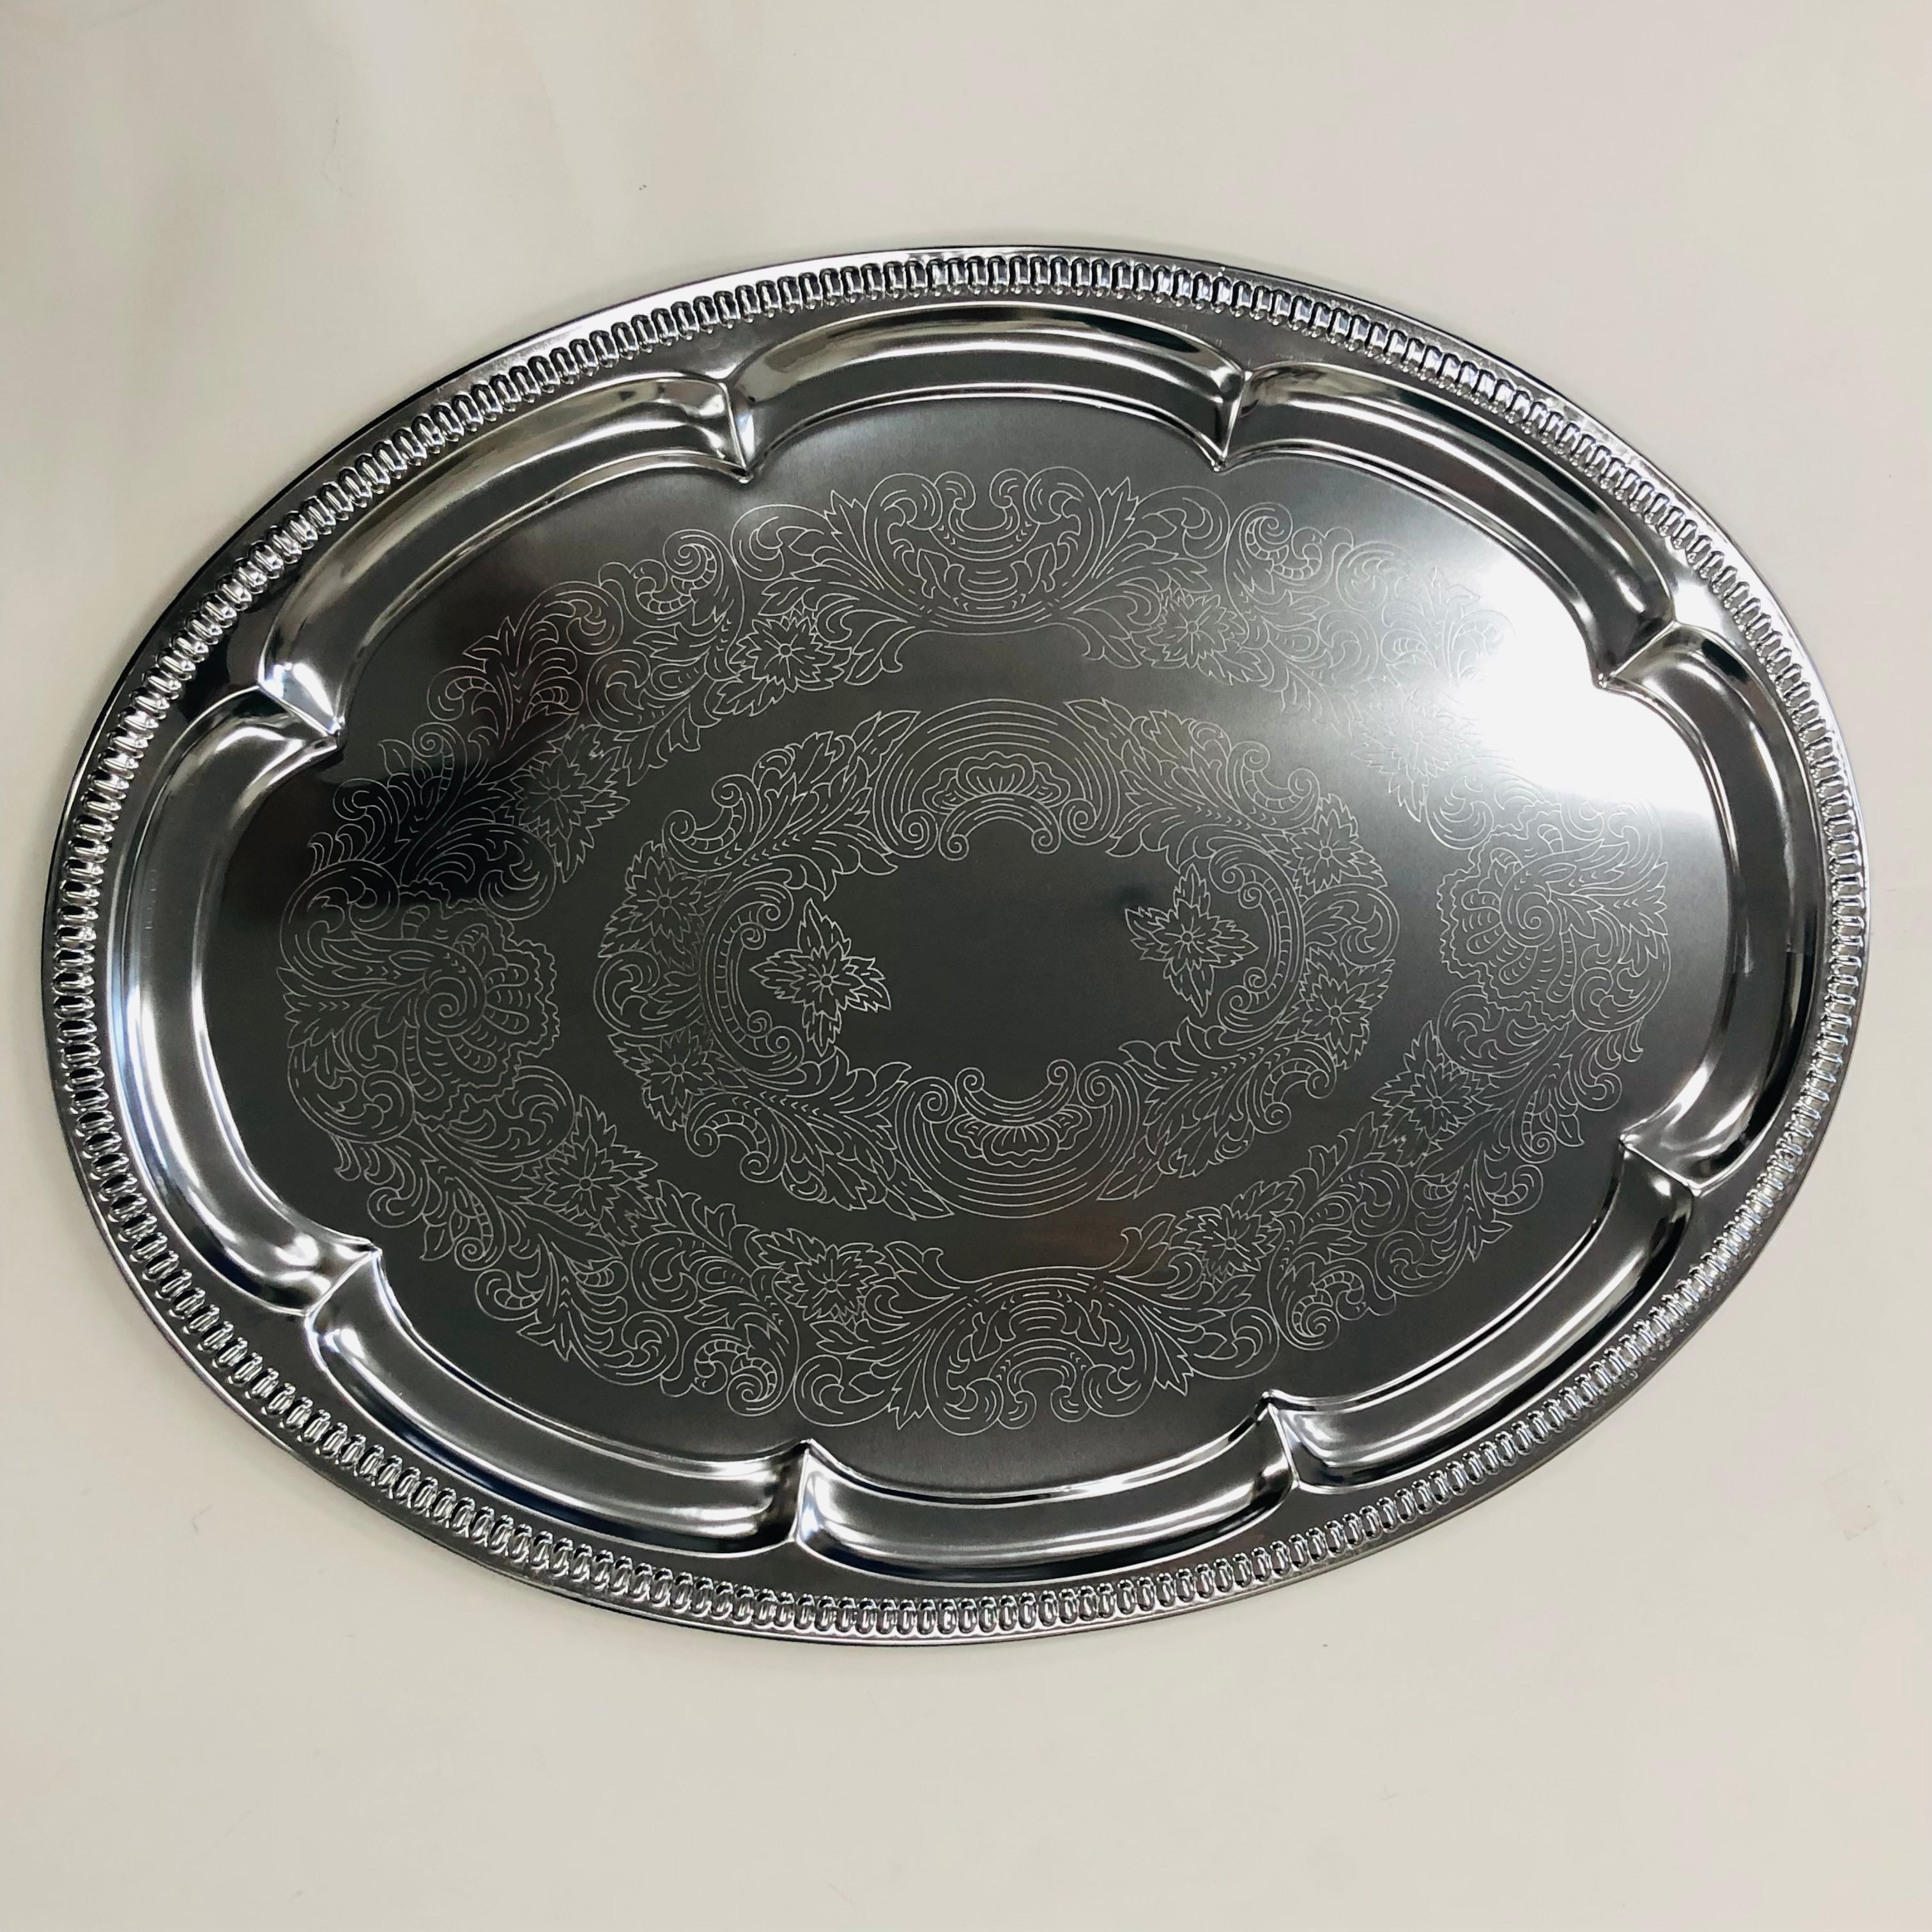 CATERING TIN CHROME PLATE  LARGE OVAL